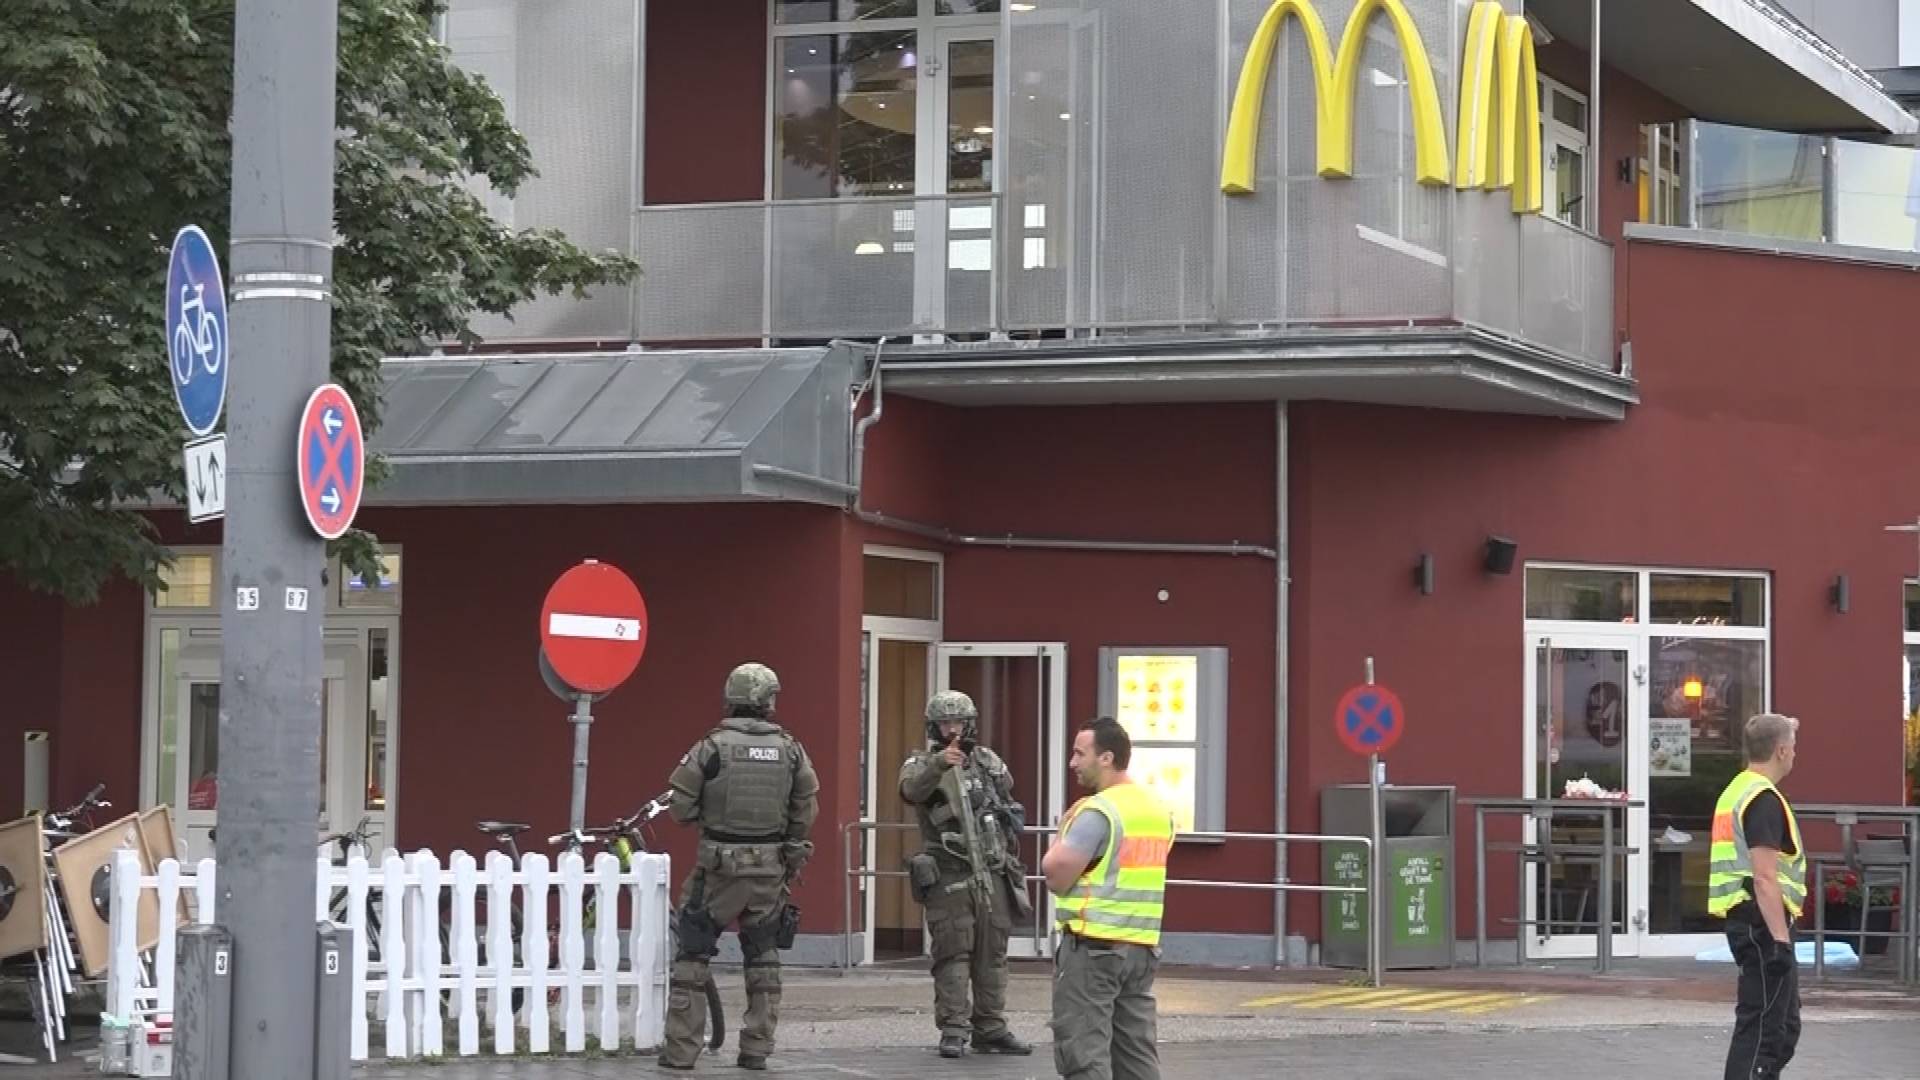 Screen grab shows special forces police officers standing guard following shooting rampage at shopping mall in Munich